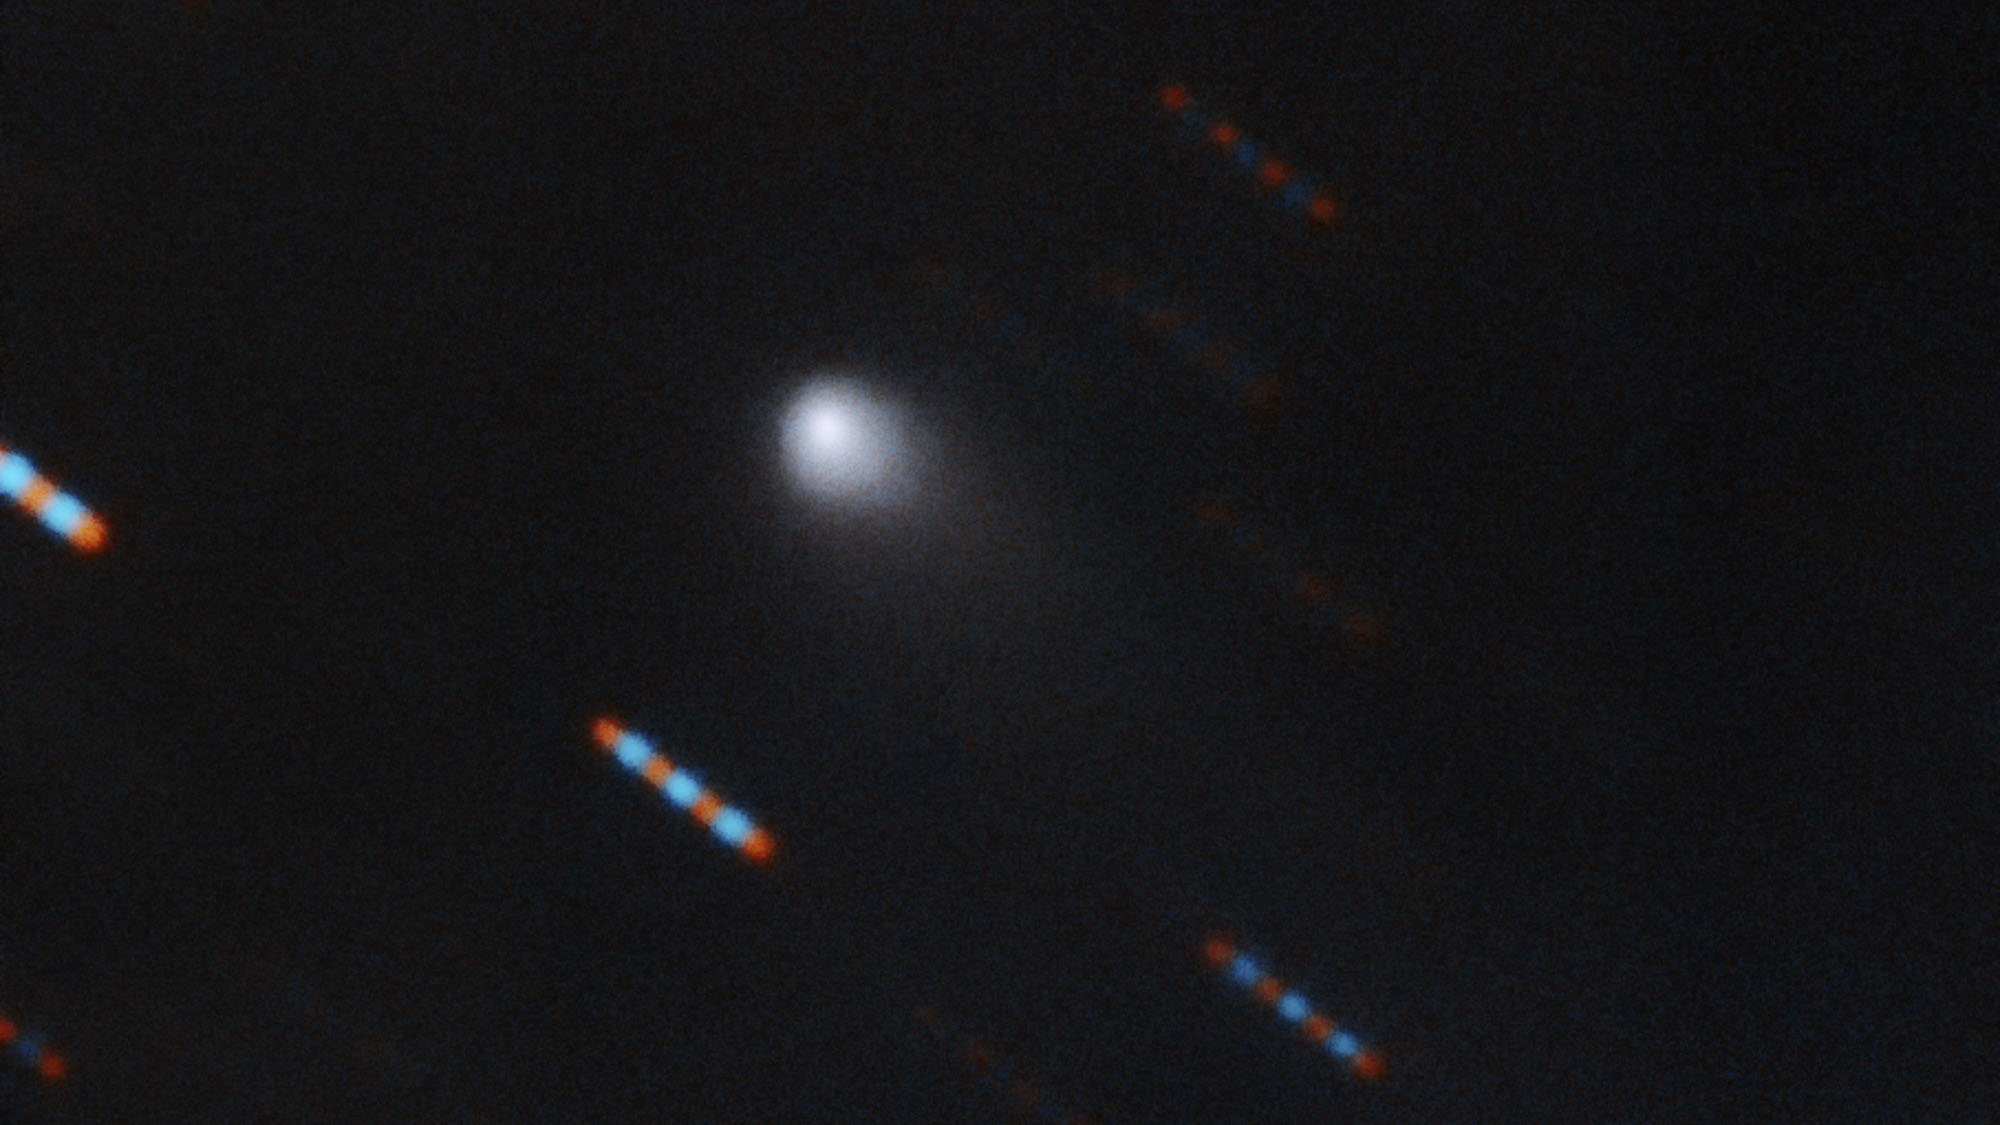 Comet Borisov was spotted before it entered the solar system by an amateur astronomer. Image via NSF.